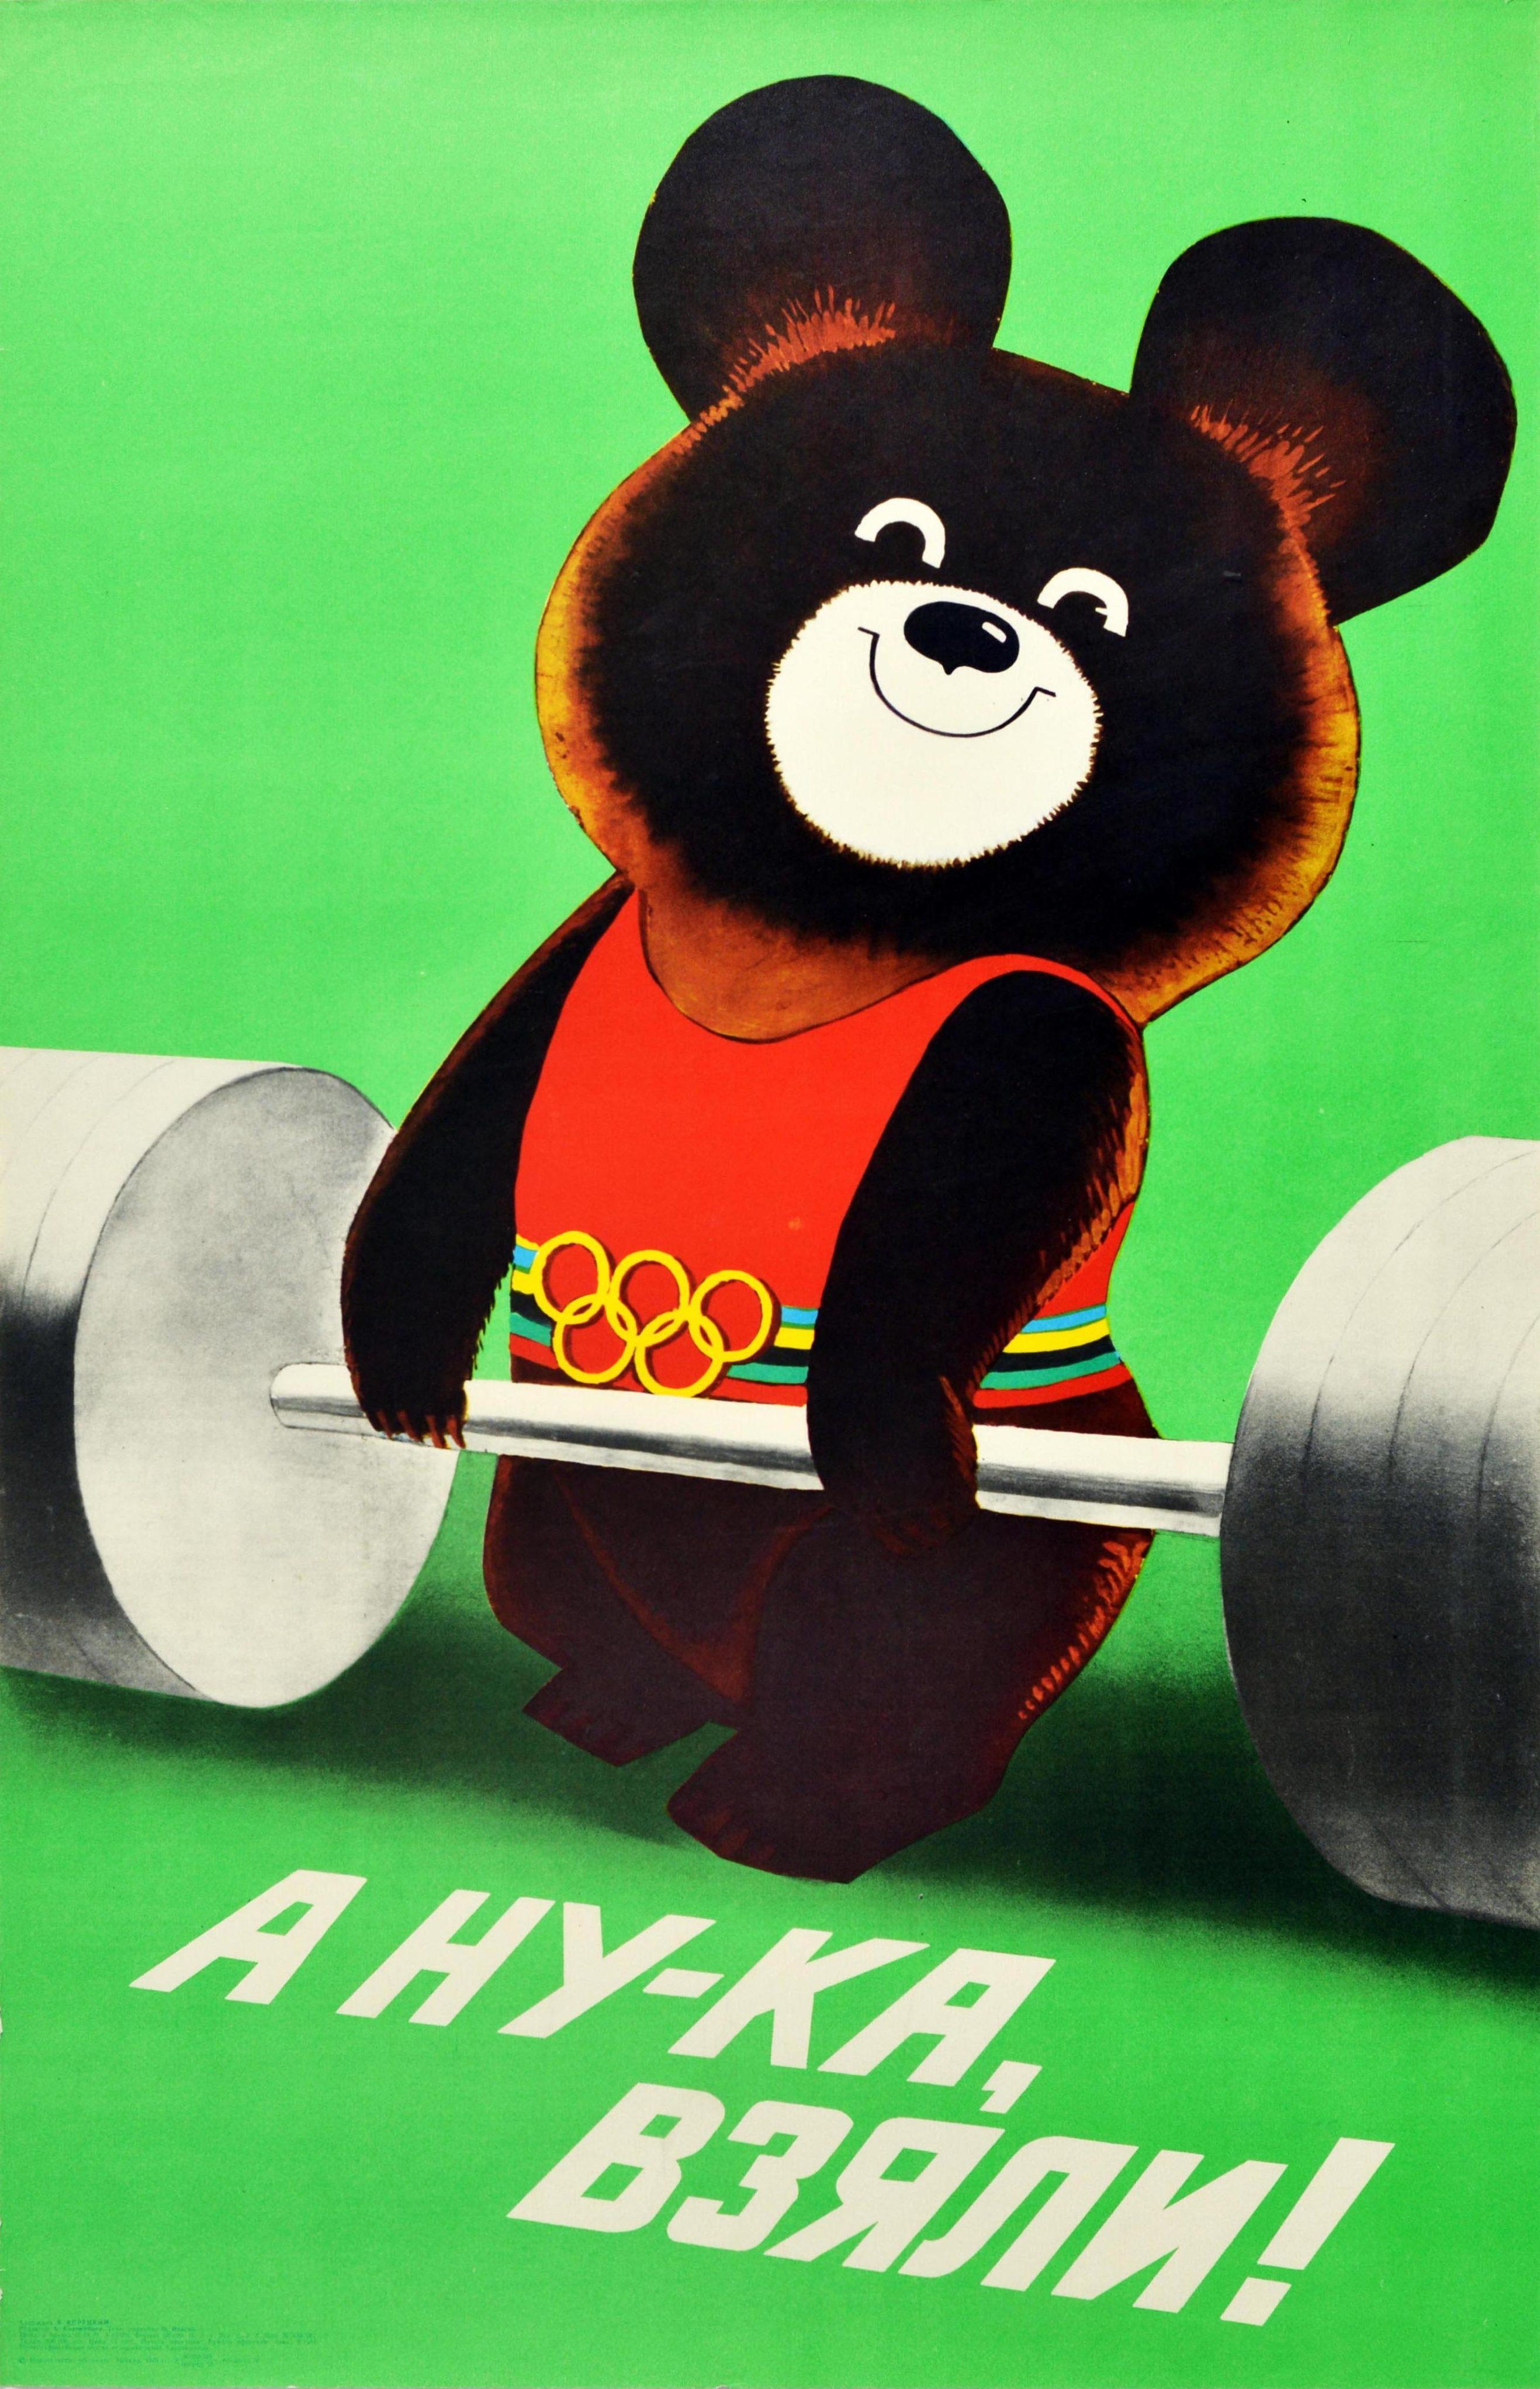 Original vintage sports poster for the 22nd Summer Olympic Games event / Games of the XXII Olympiad 1980 held in Moscow Russia featuring a fun and colourful illustration smiling bear - Misha the Moscow Olympic Games mascot (designed by the